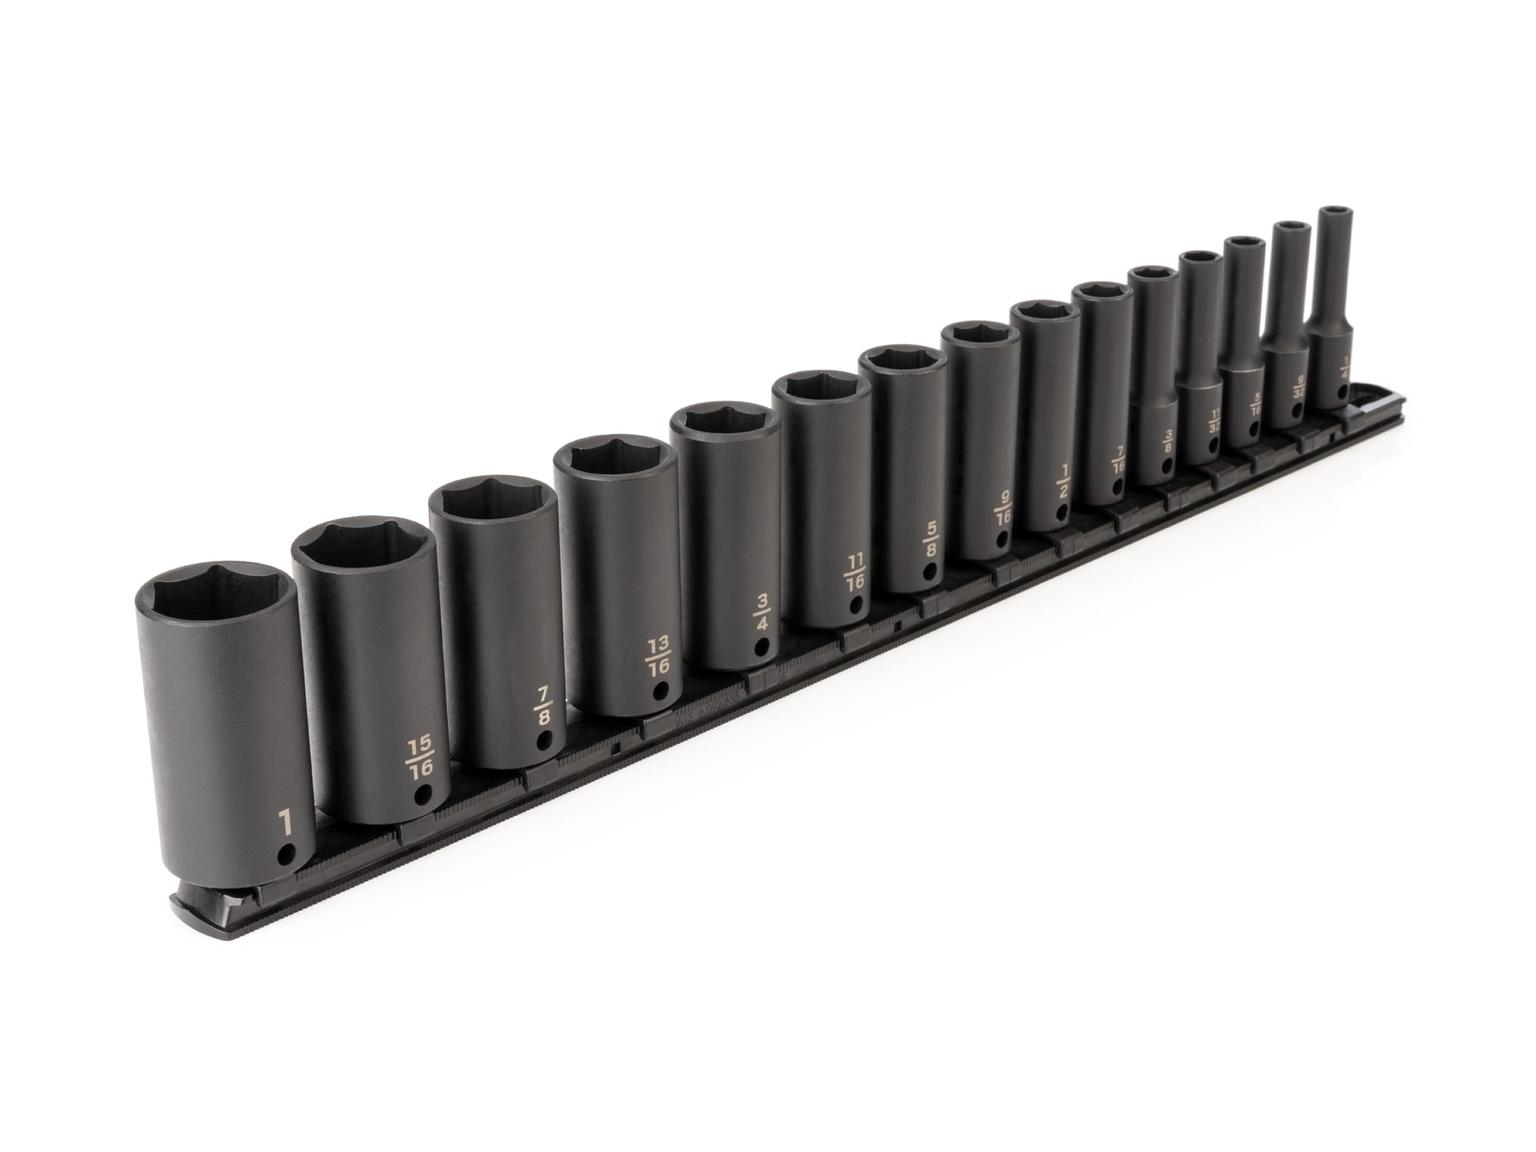 TEKTON SID91105-T 3/8 Inch Drive Deep 6-Point Impact Socket Set with Rail, 15-Piece (1/4-1 in.)